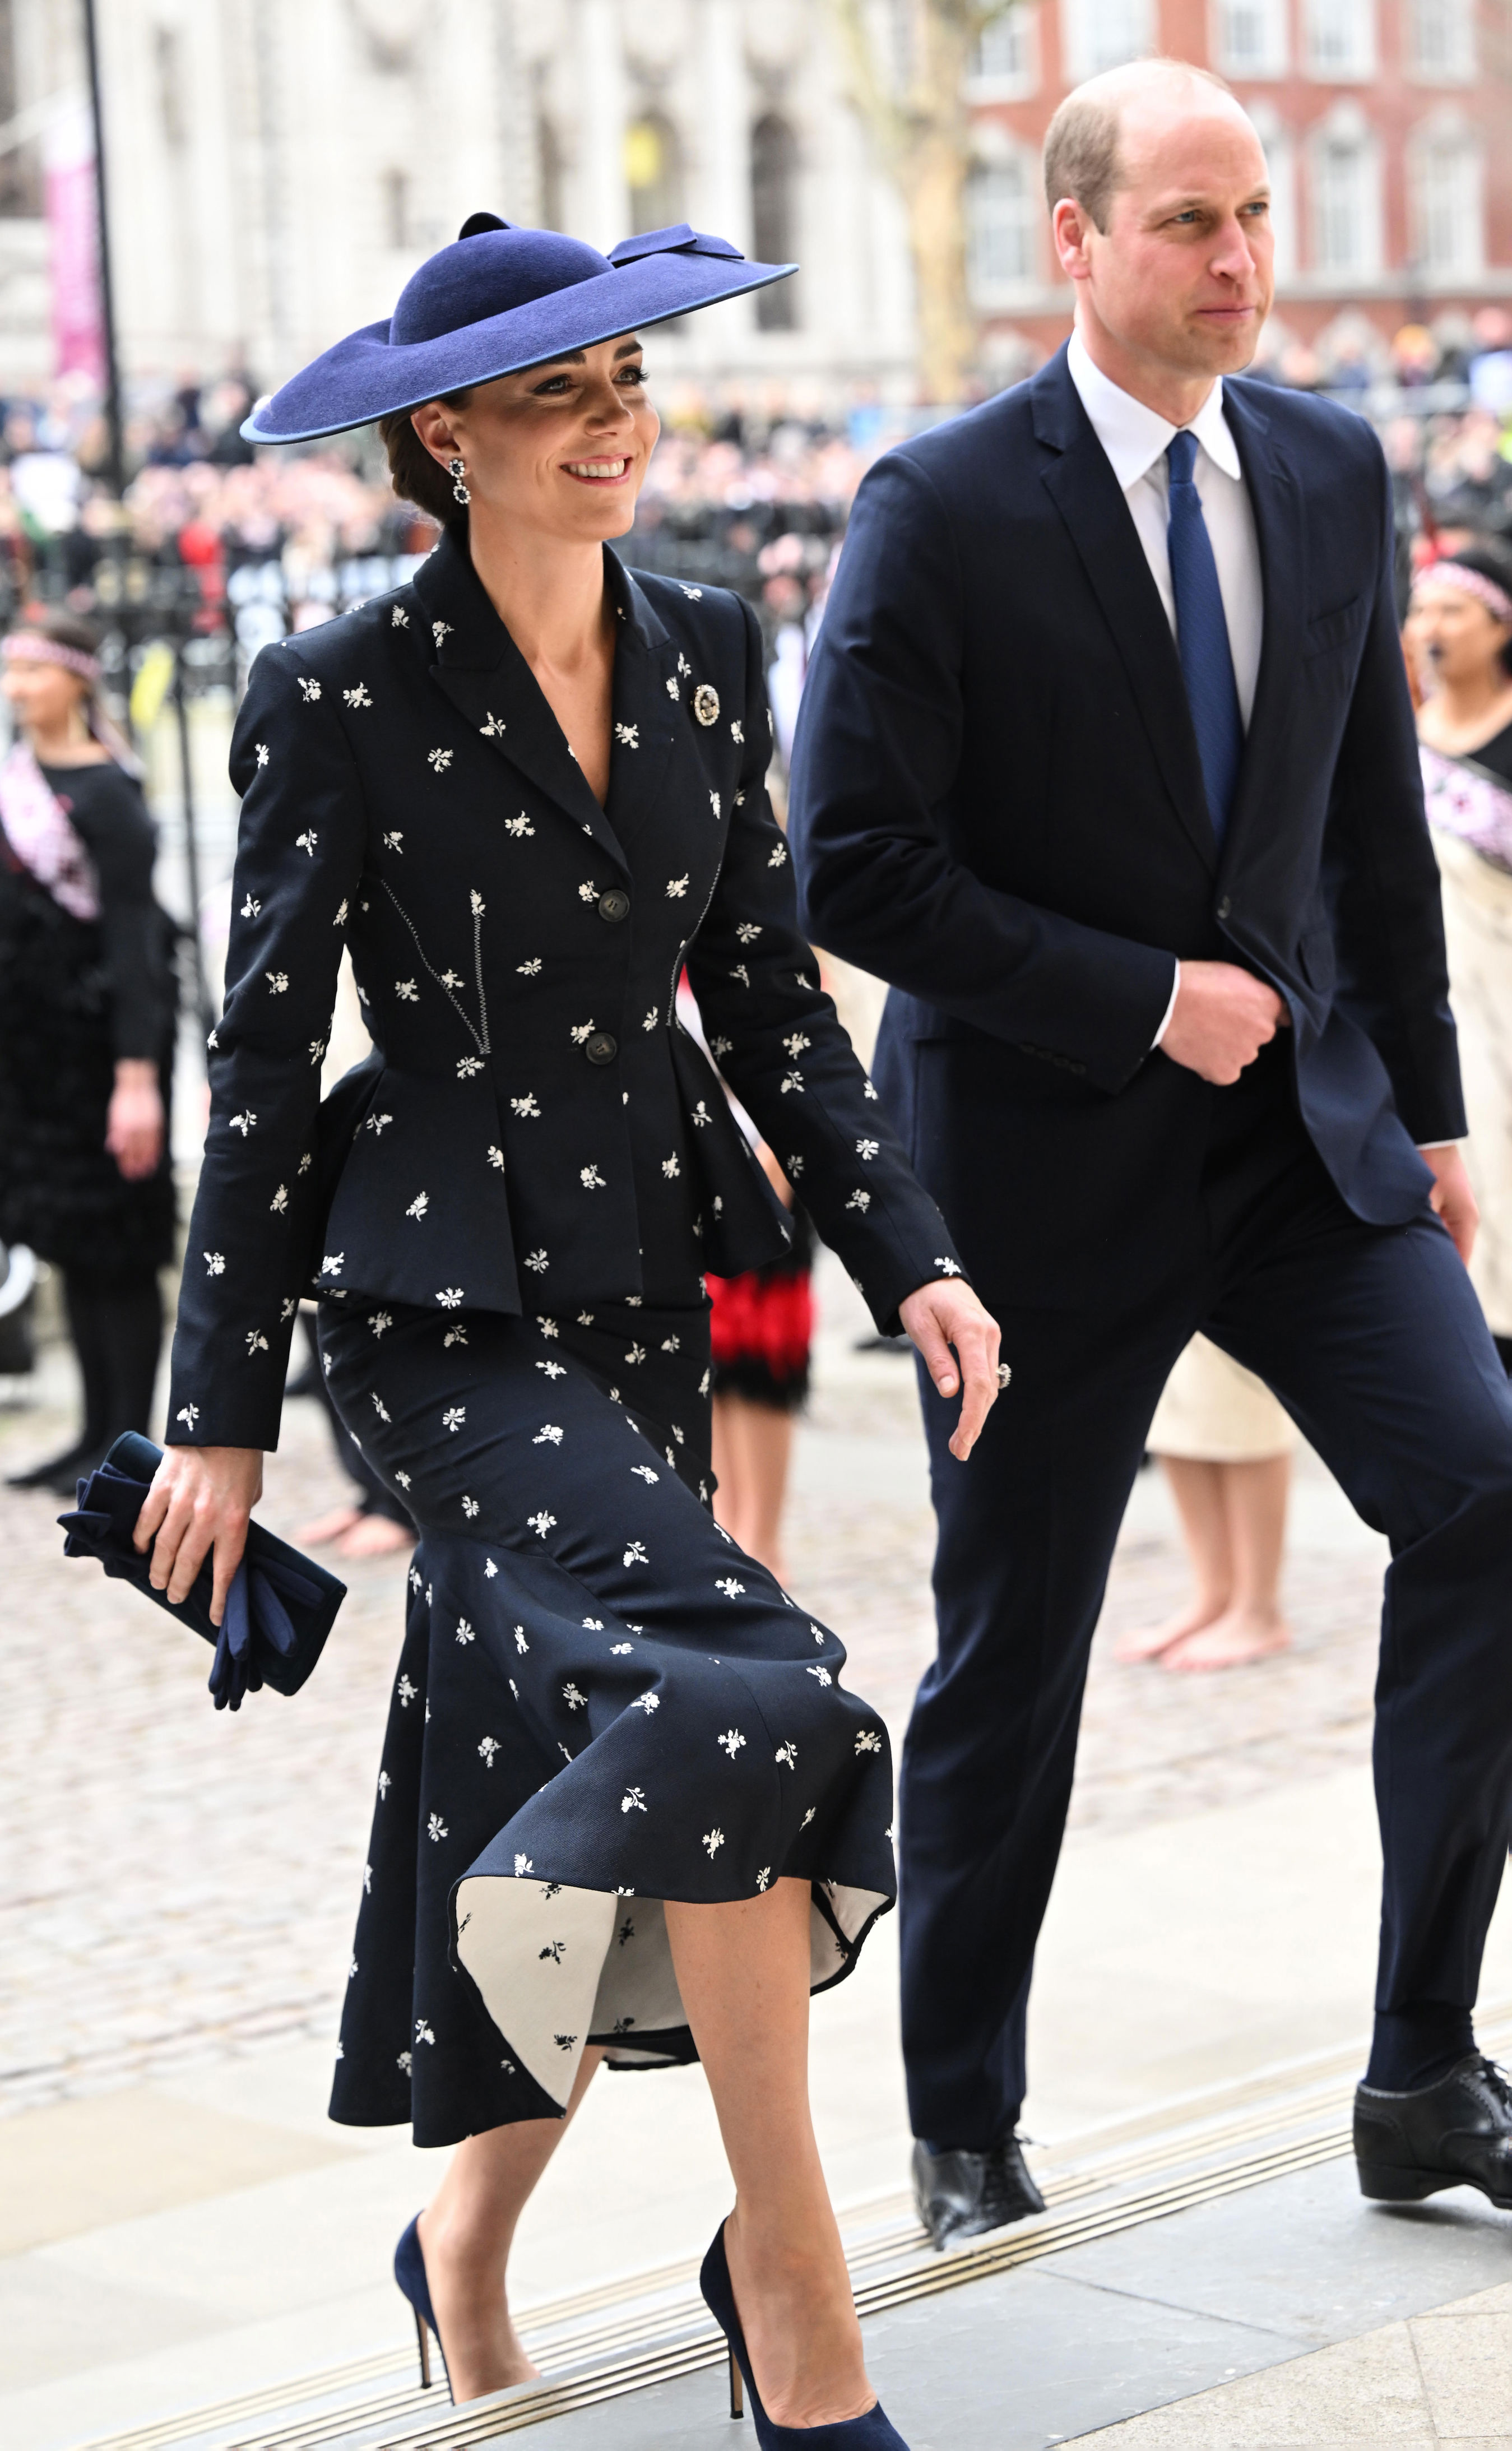 <p>Princess Kate and <a href="https://www.wonderwall.com/celebrity/profiles/overview/prince-william-482.article">Prince William</a> arrived at the annual Commonwealth Day Service at Westminster Abbey in London on March 13, 2022 -- the first one of his father King Charles III's reign.</p>